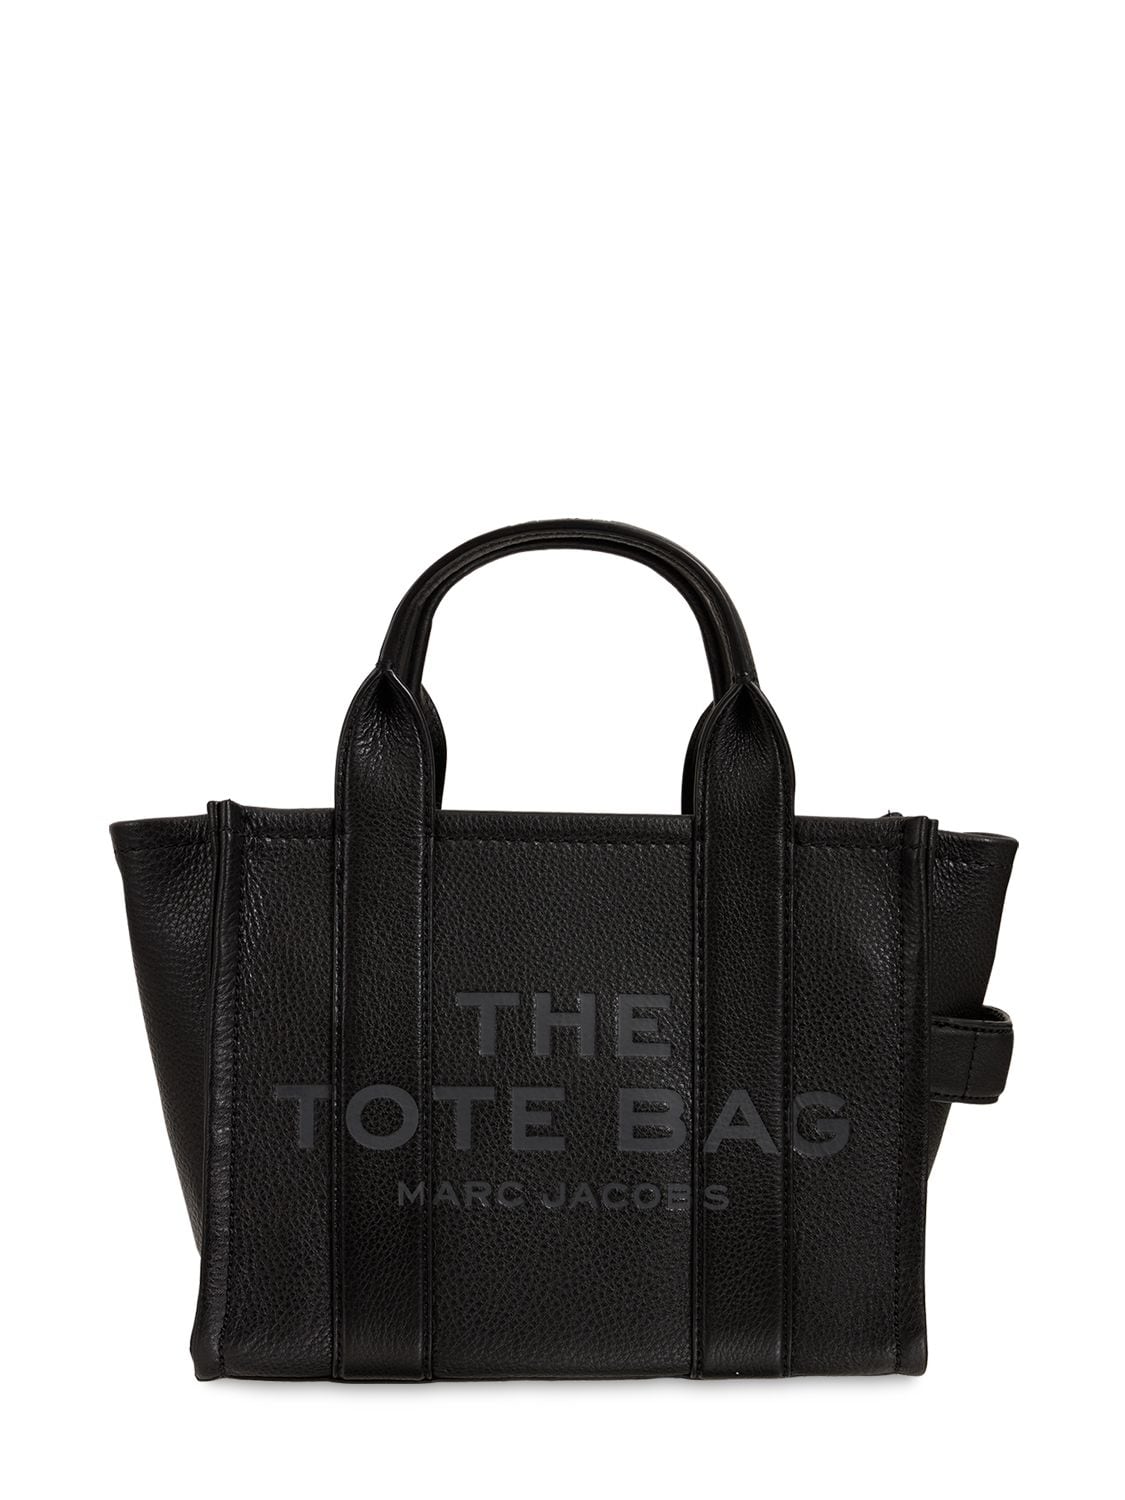 MARC JACOBS (THE) Mini Traveler Leather Tote Bag